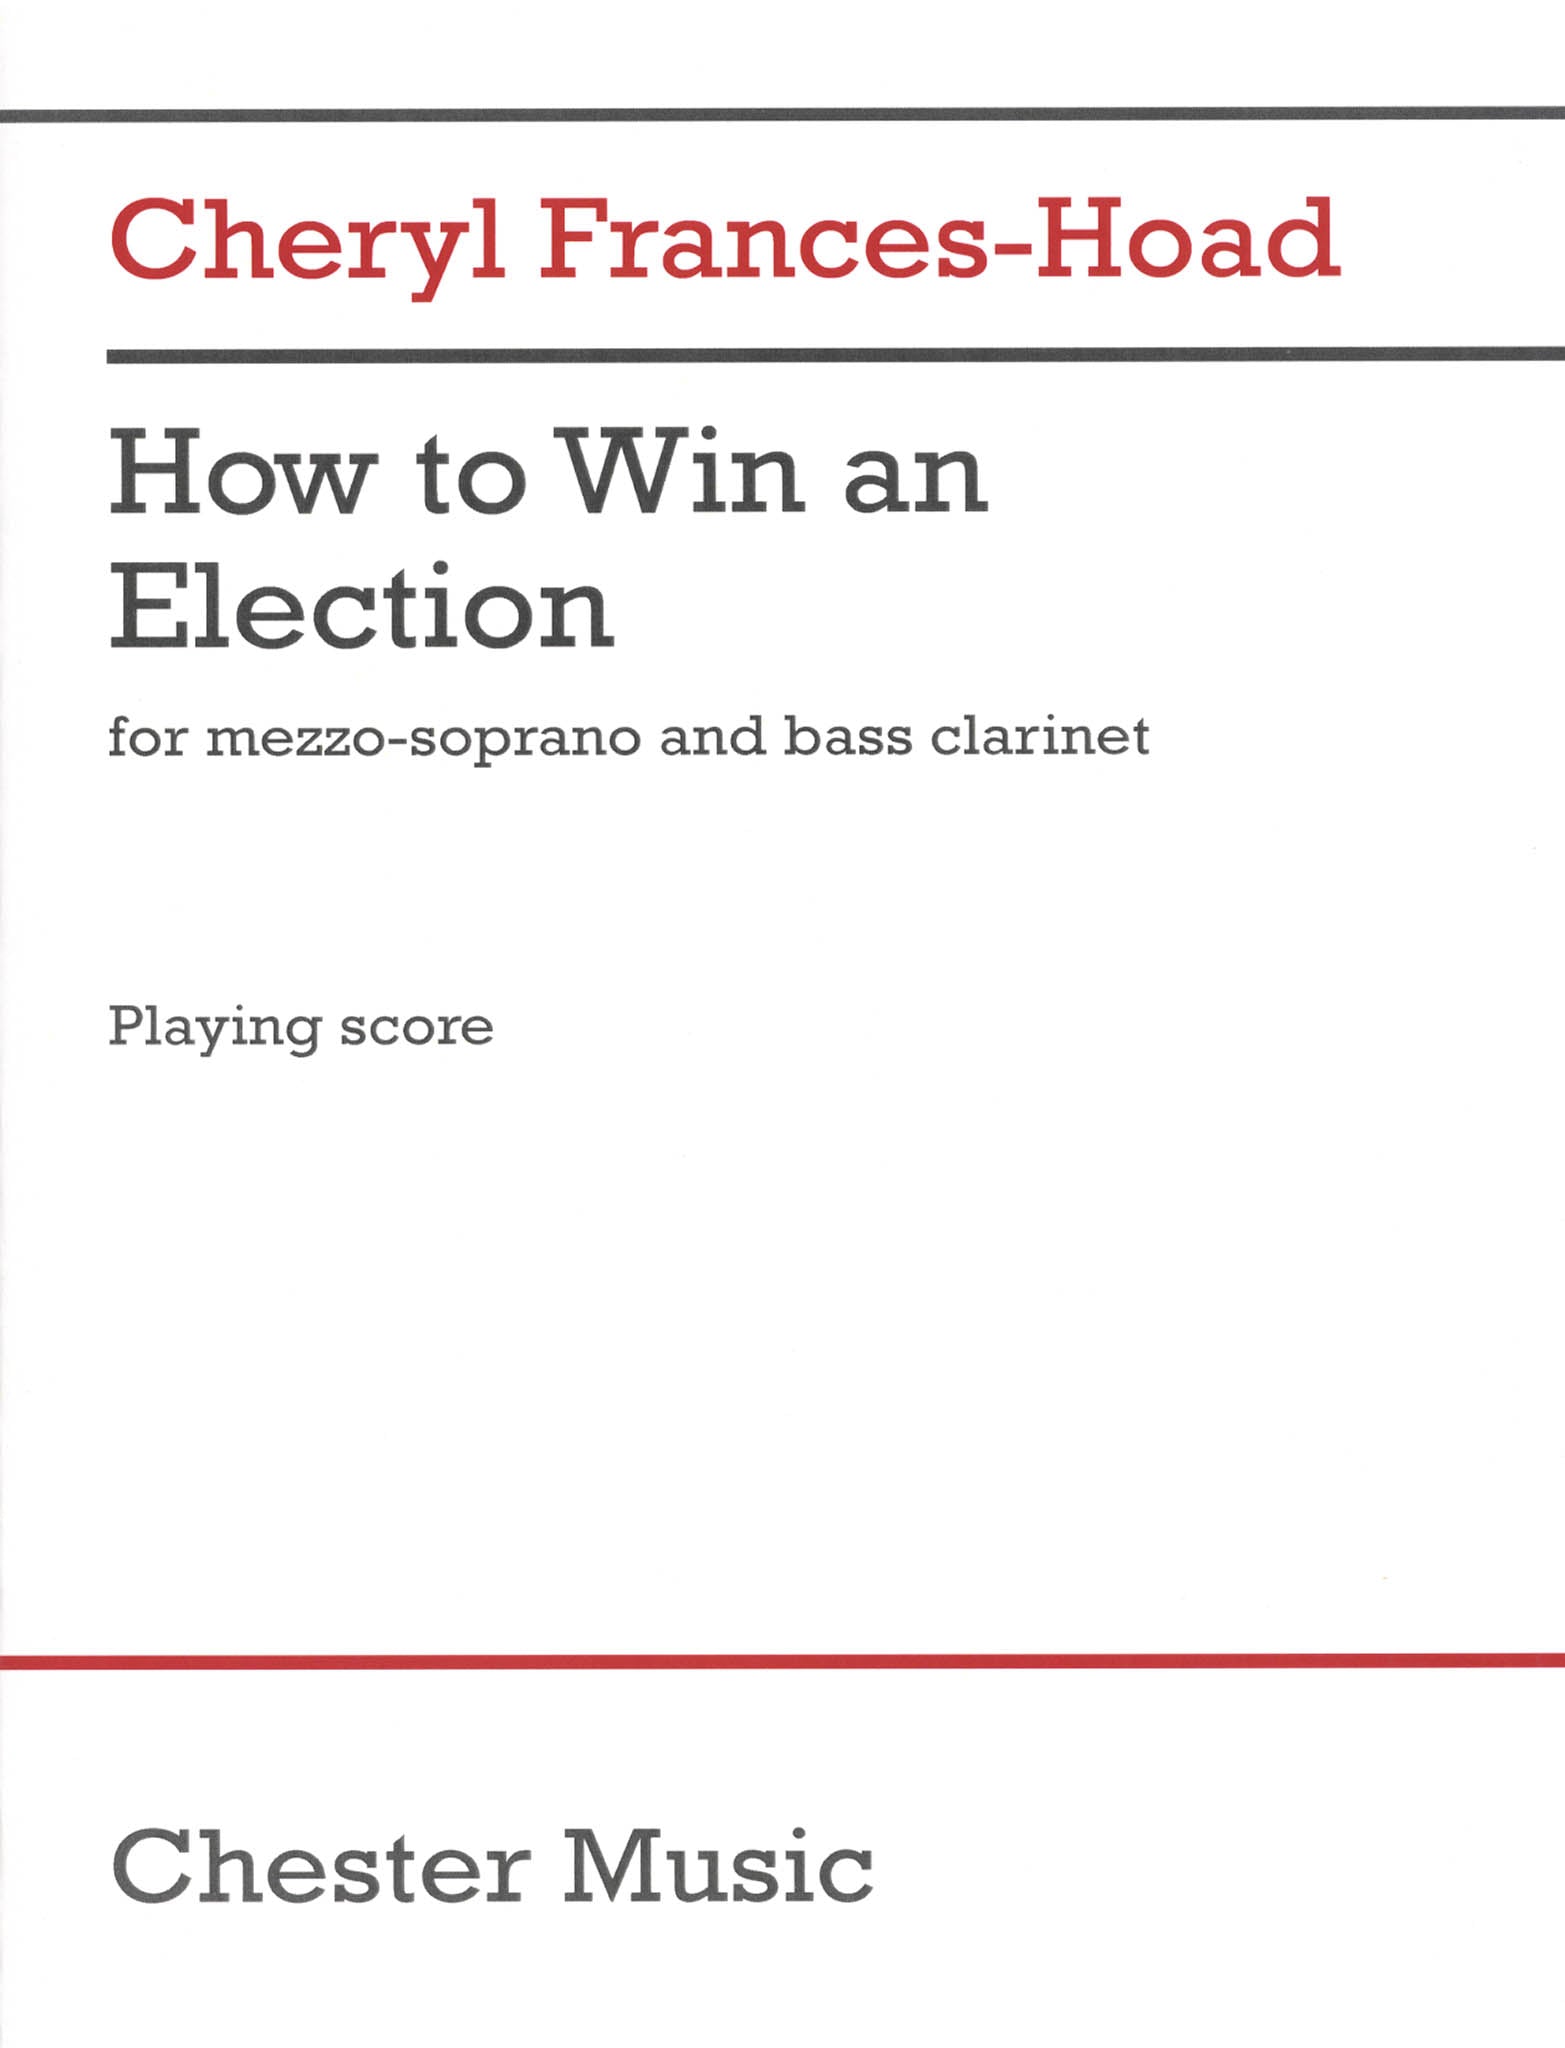 Frances-Hoad How to Win an Election voice & bass clarinet duet cover